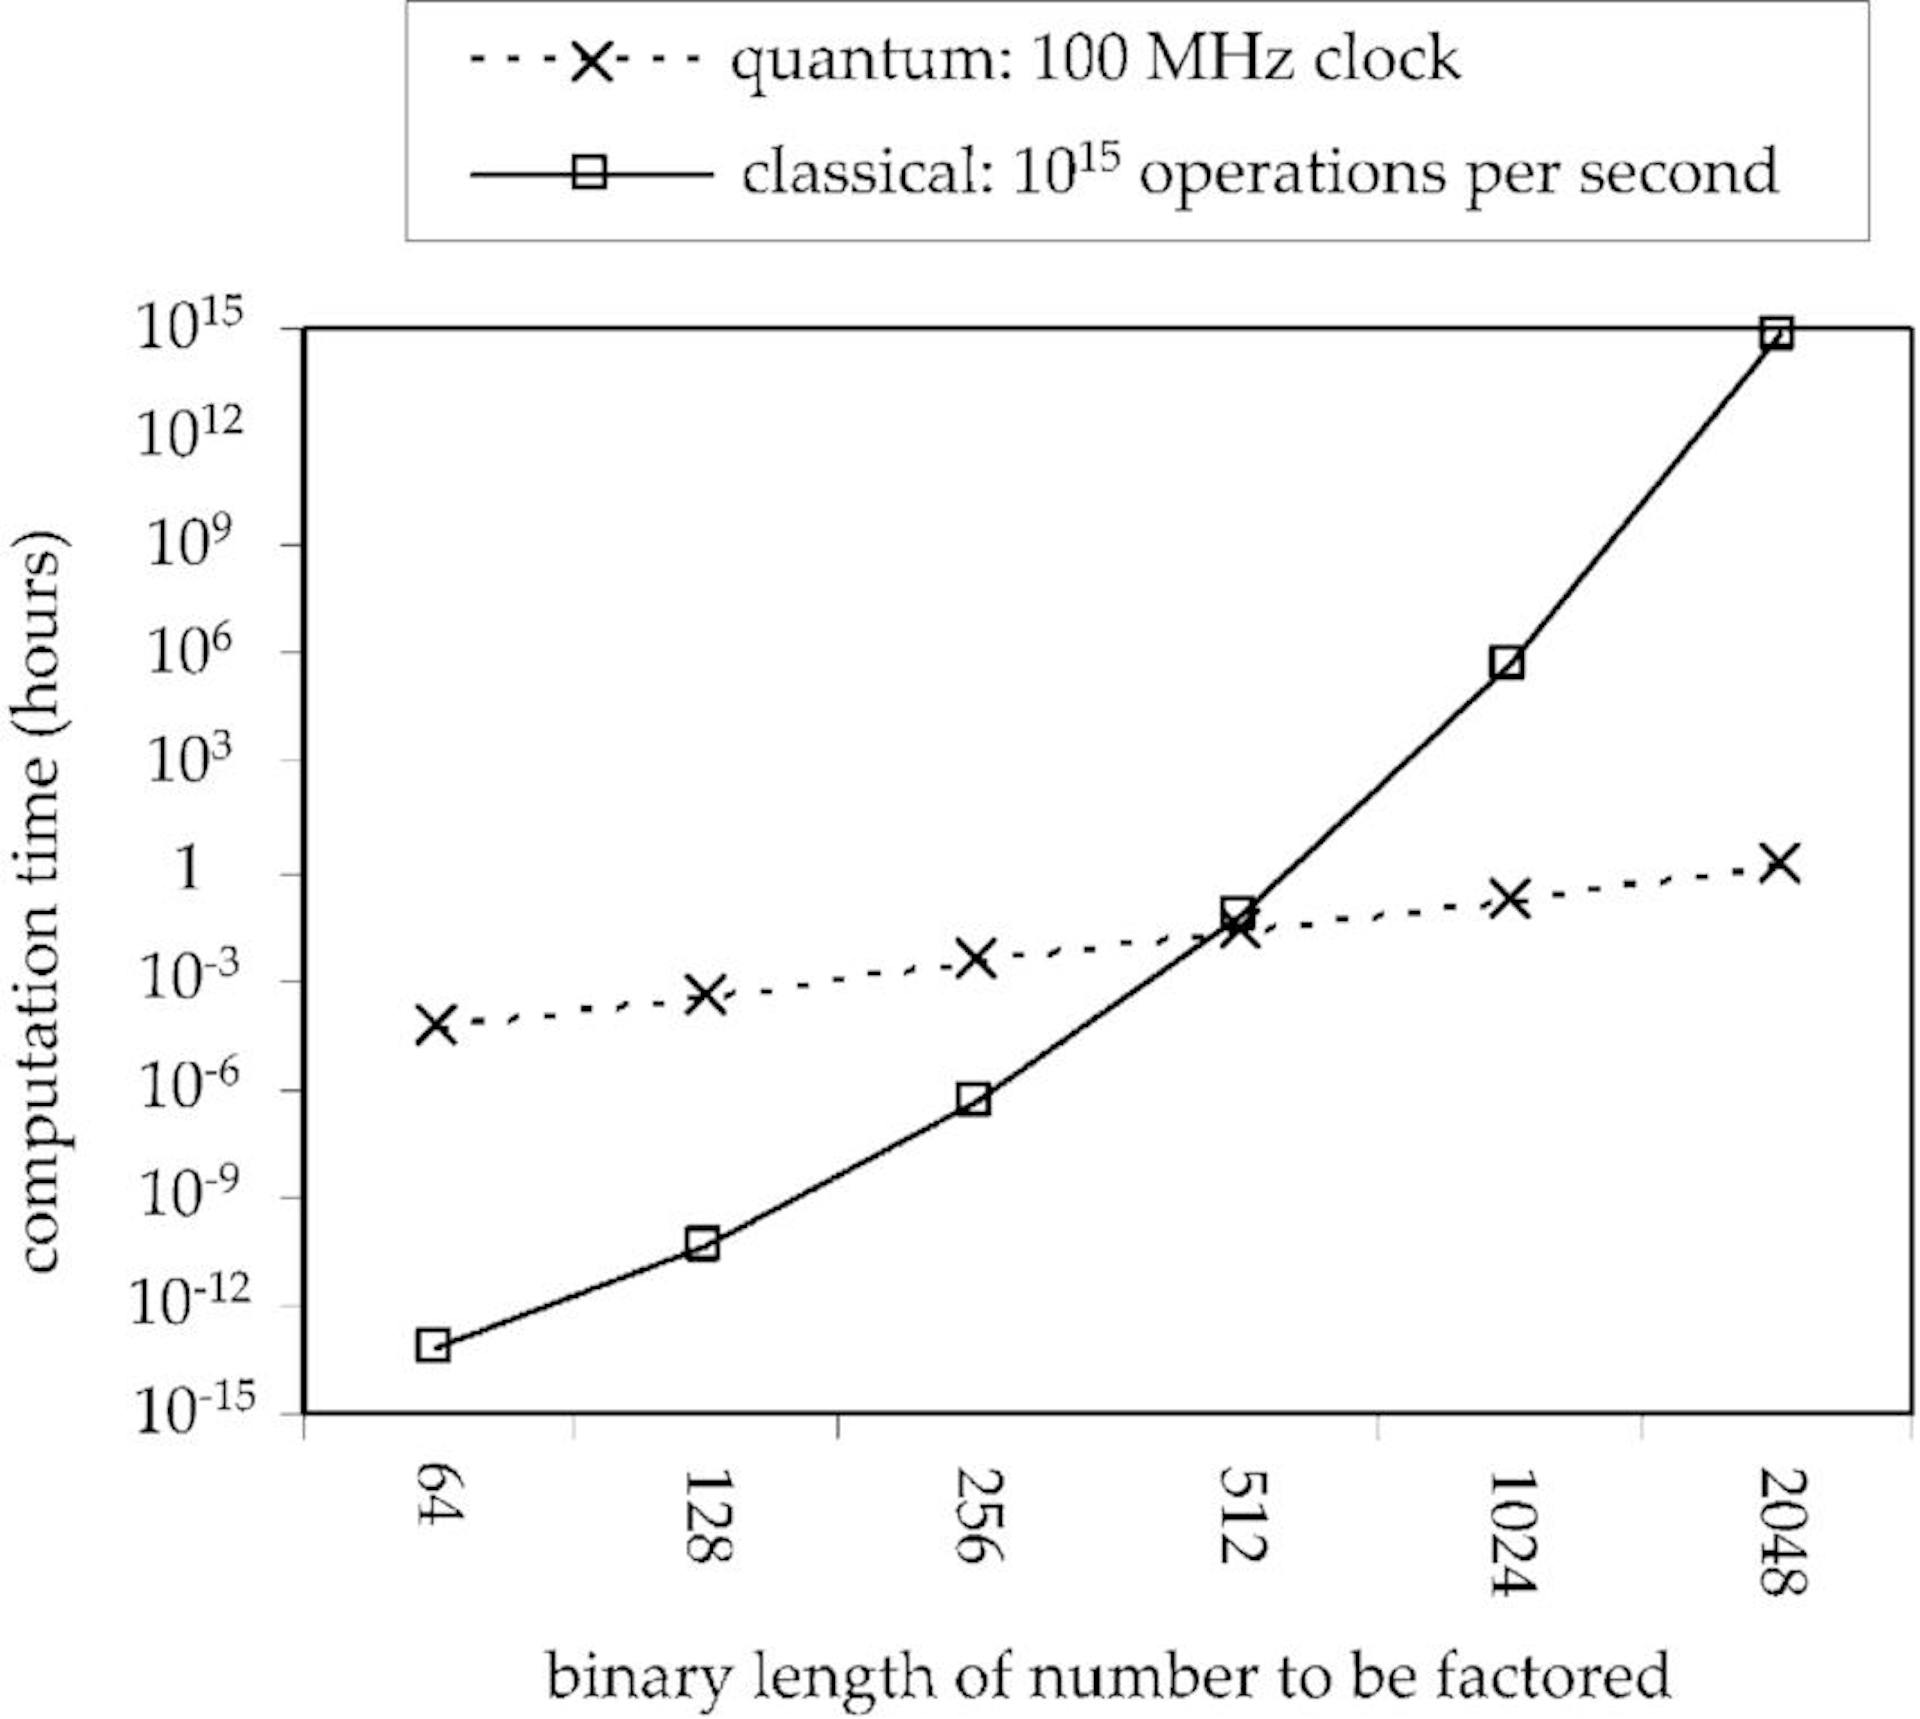 Source - https://www.researchgate.net/figure/Comparison-of-estimated-computation-time-in-hours-for-the-problem-of-factoring-numbers-of_fig1_2986358